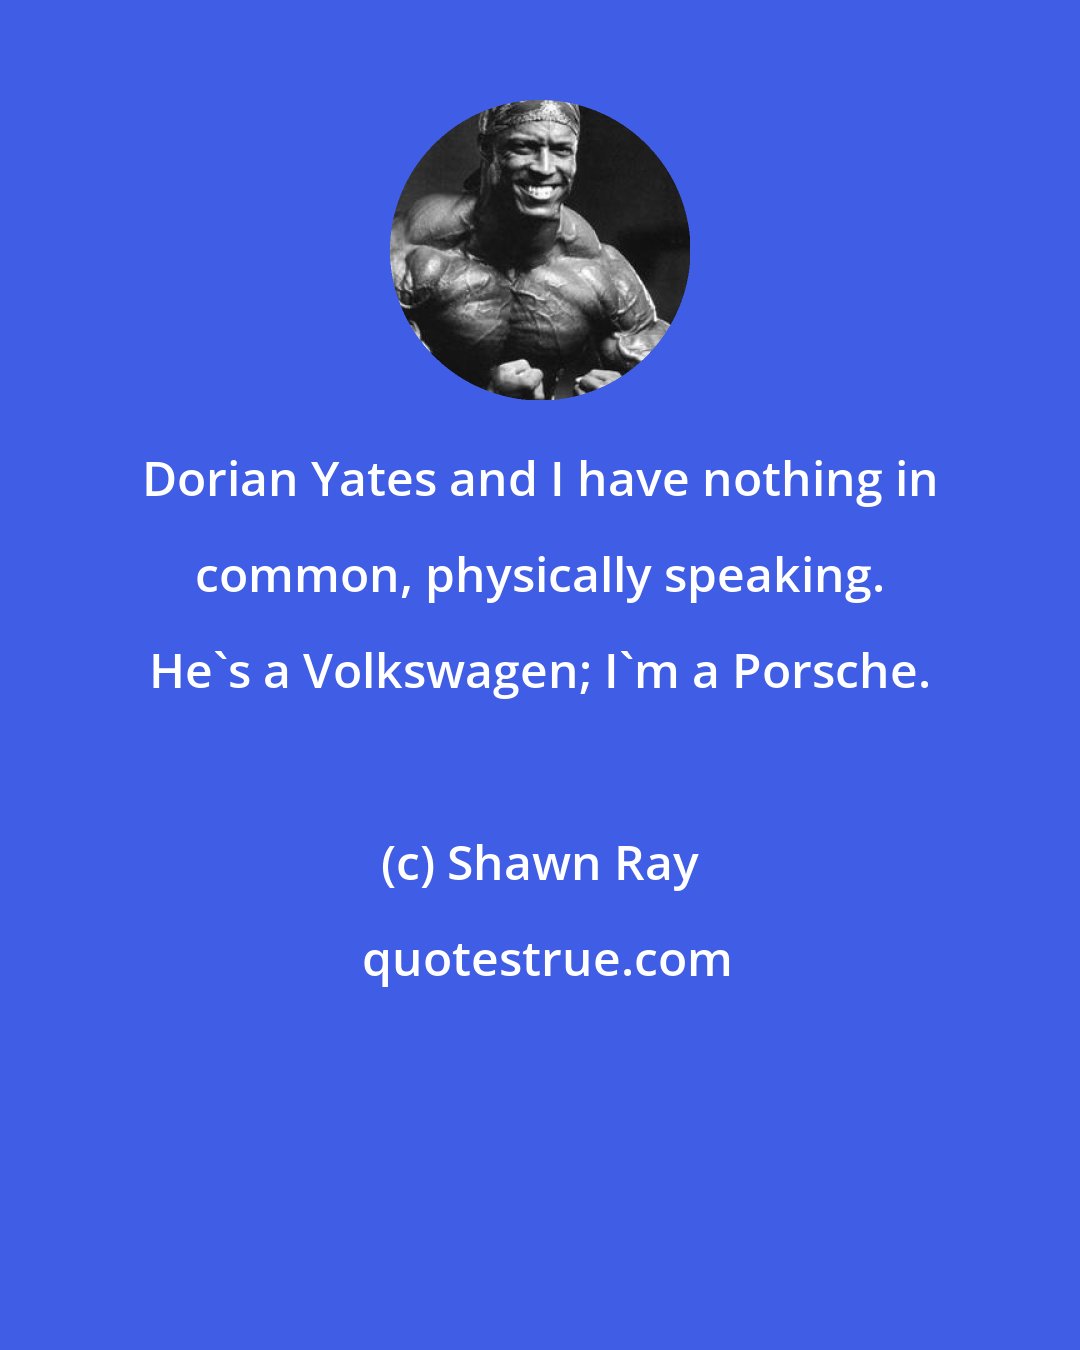 Shawn Ray: Dorian Yates and I have nothing in common, physically speaking. He's a Volkswagen; I'm a Porsche.